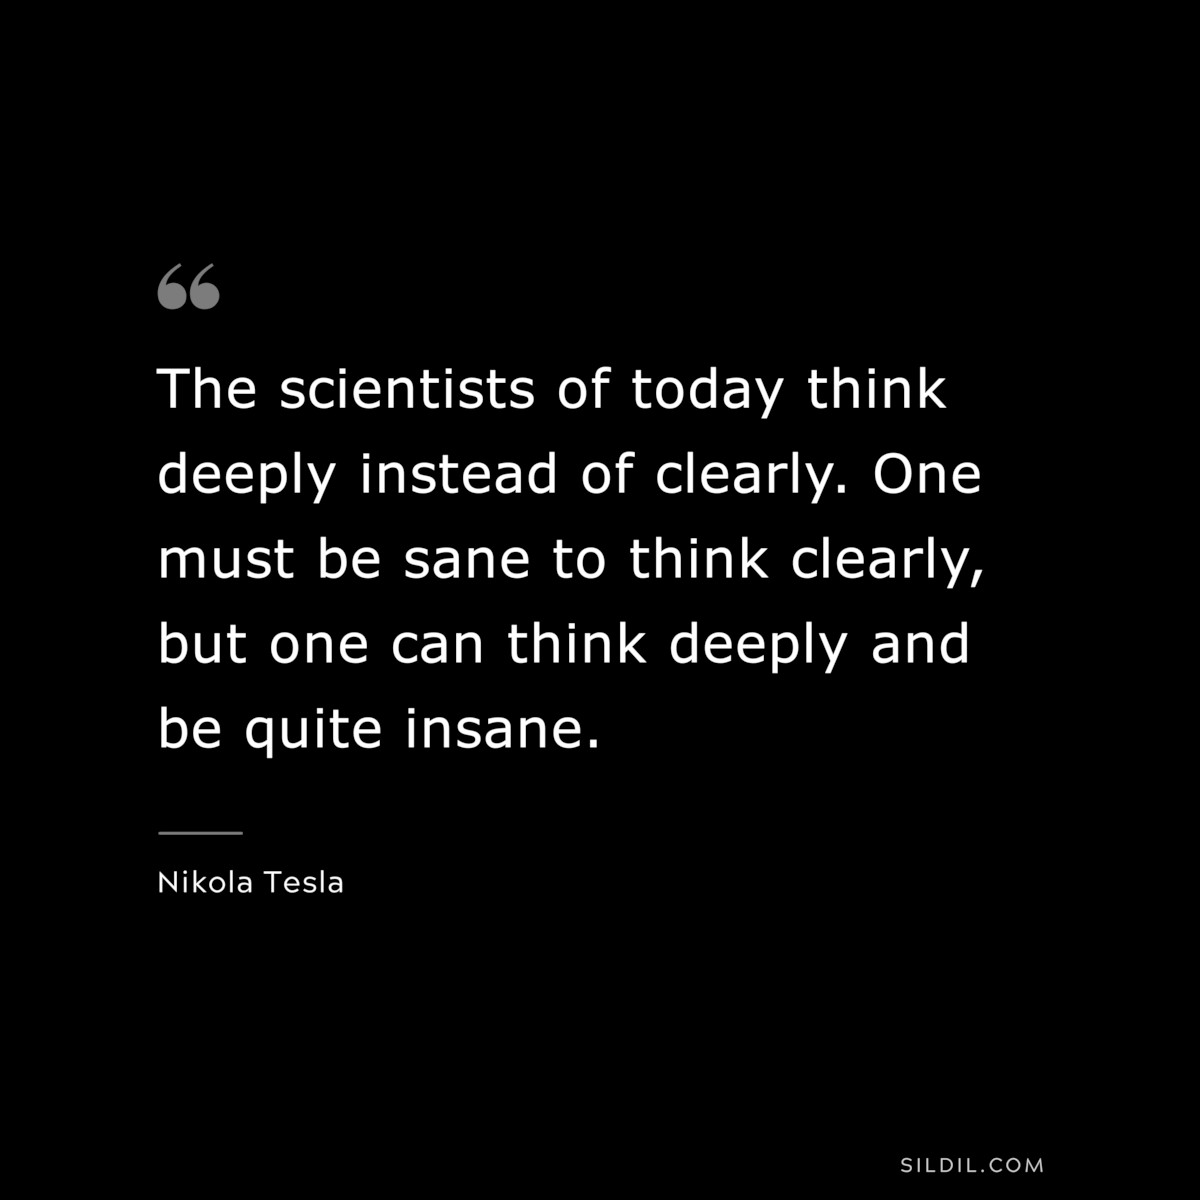 The scientists of today think deeply instead of clearly. One must be sane to think clearly, but one can think deeply and be quite insane. ― Nikola Tesla